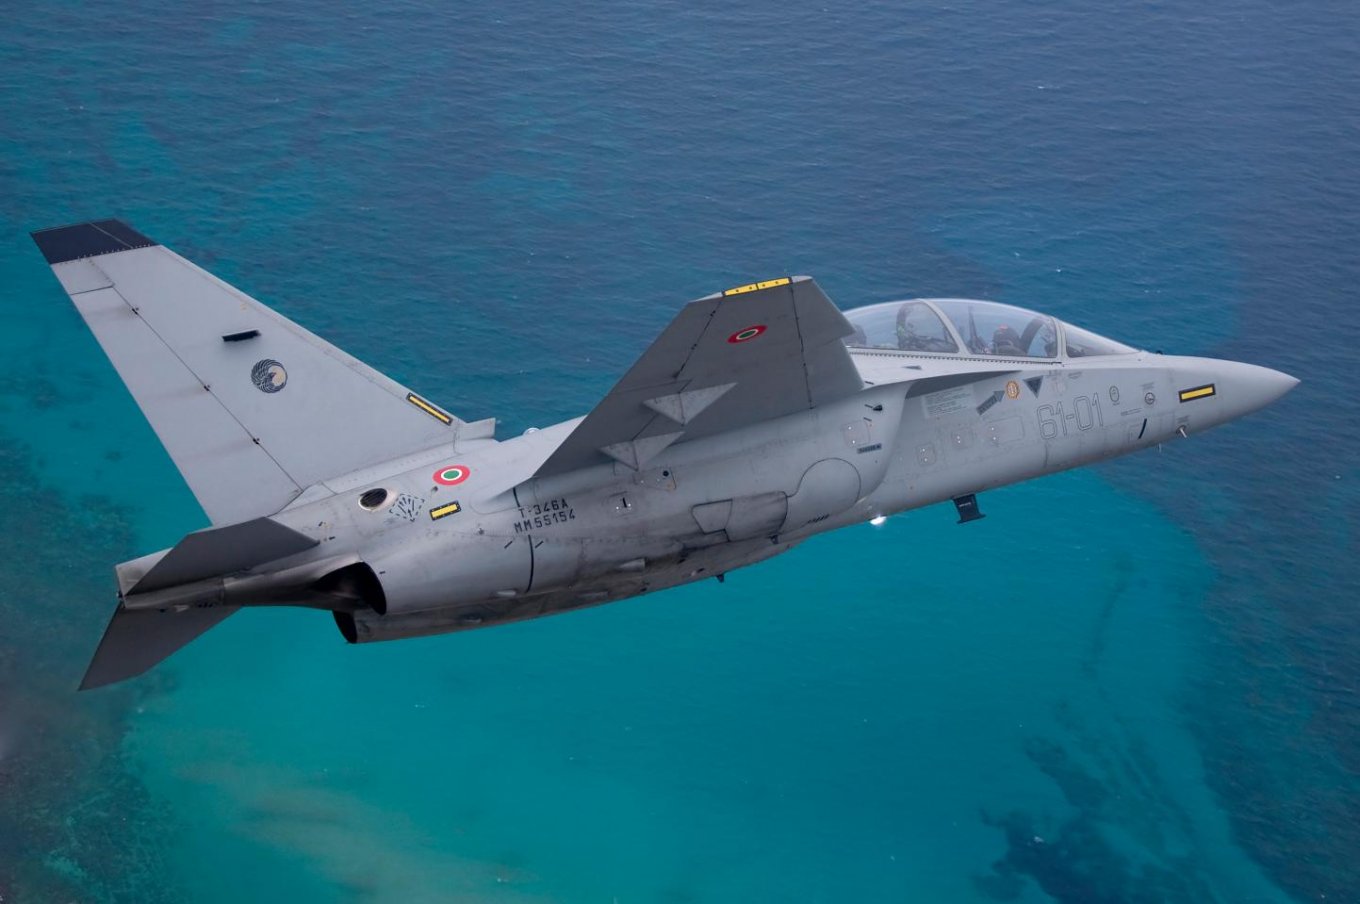 The M-346 Master jet trainer and light combat aircraft / Photo credit: Leonardo Defense Express Spain Upgrades Fleet: 40 Million Contract to Extend the Life of F-5BM Fighters Until 2030